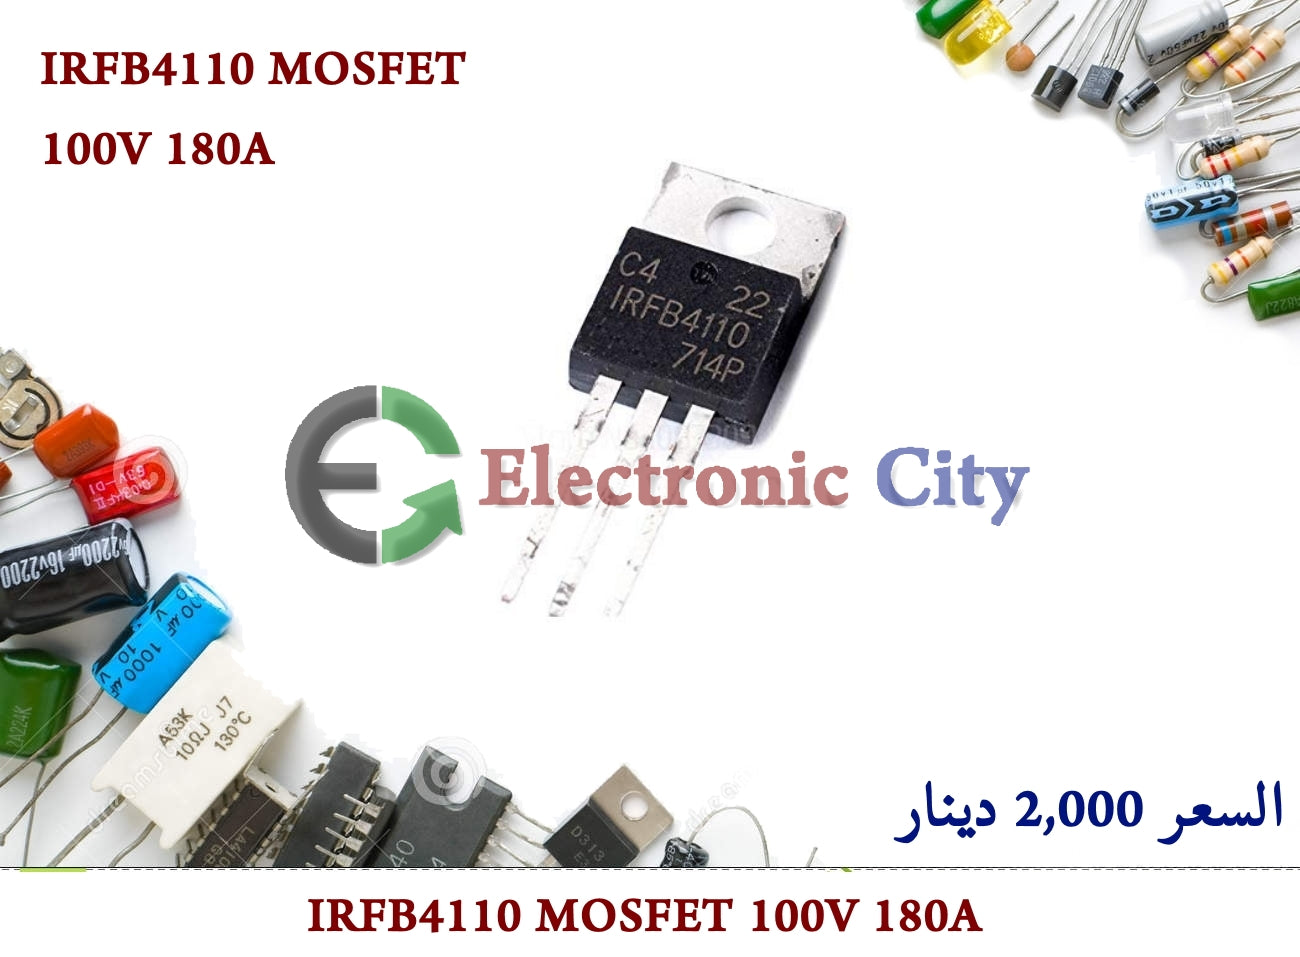 IRFB4110 MOSFET 100V 180A